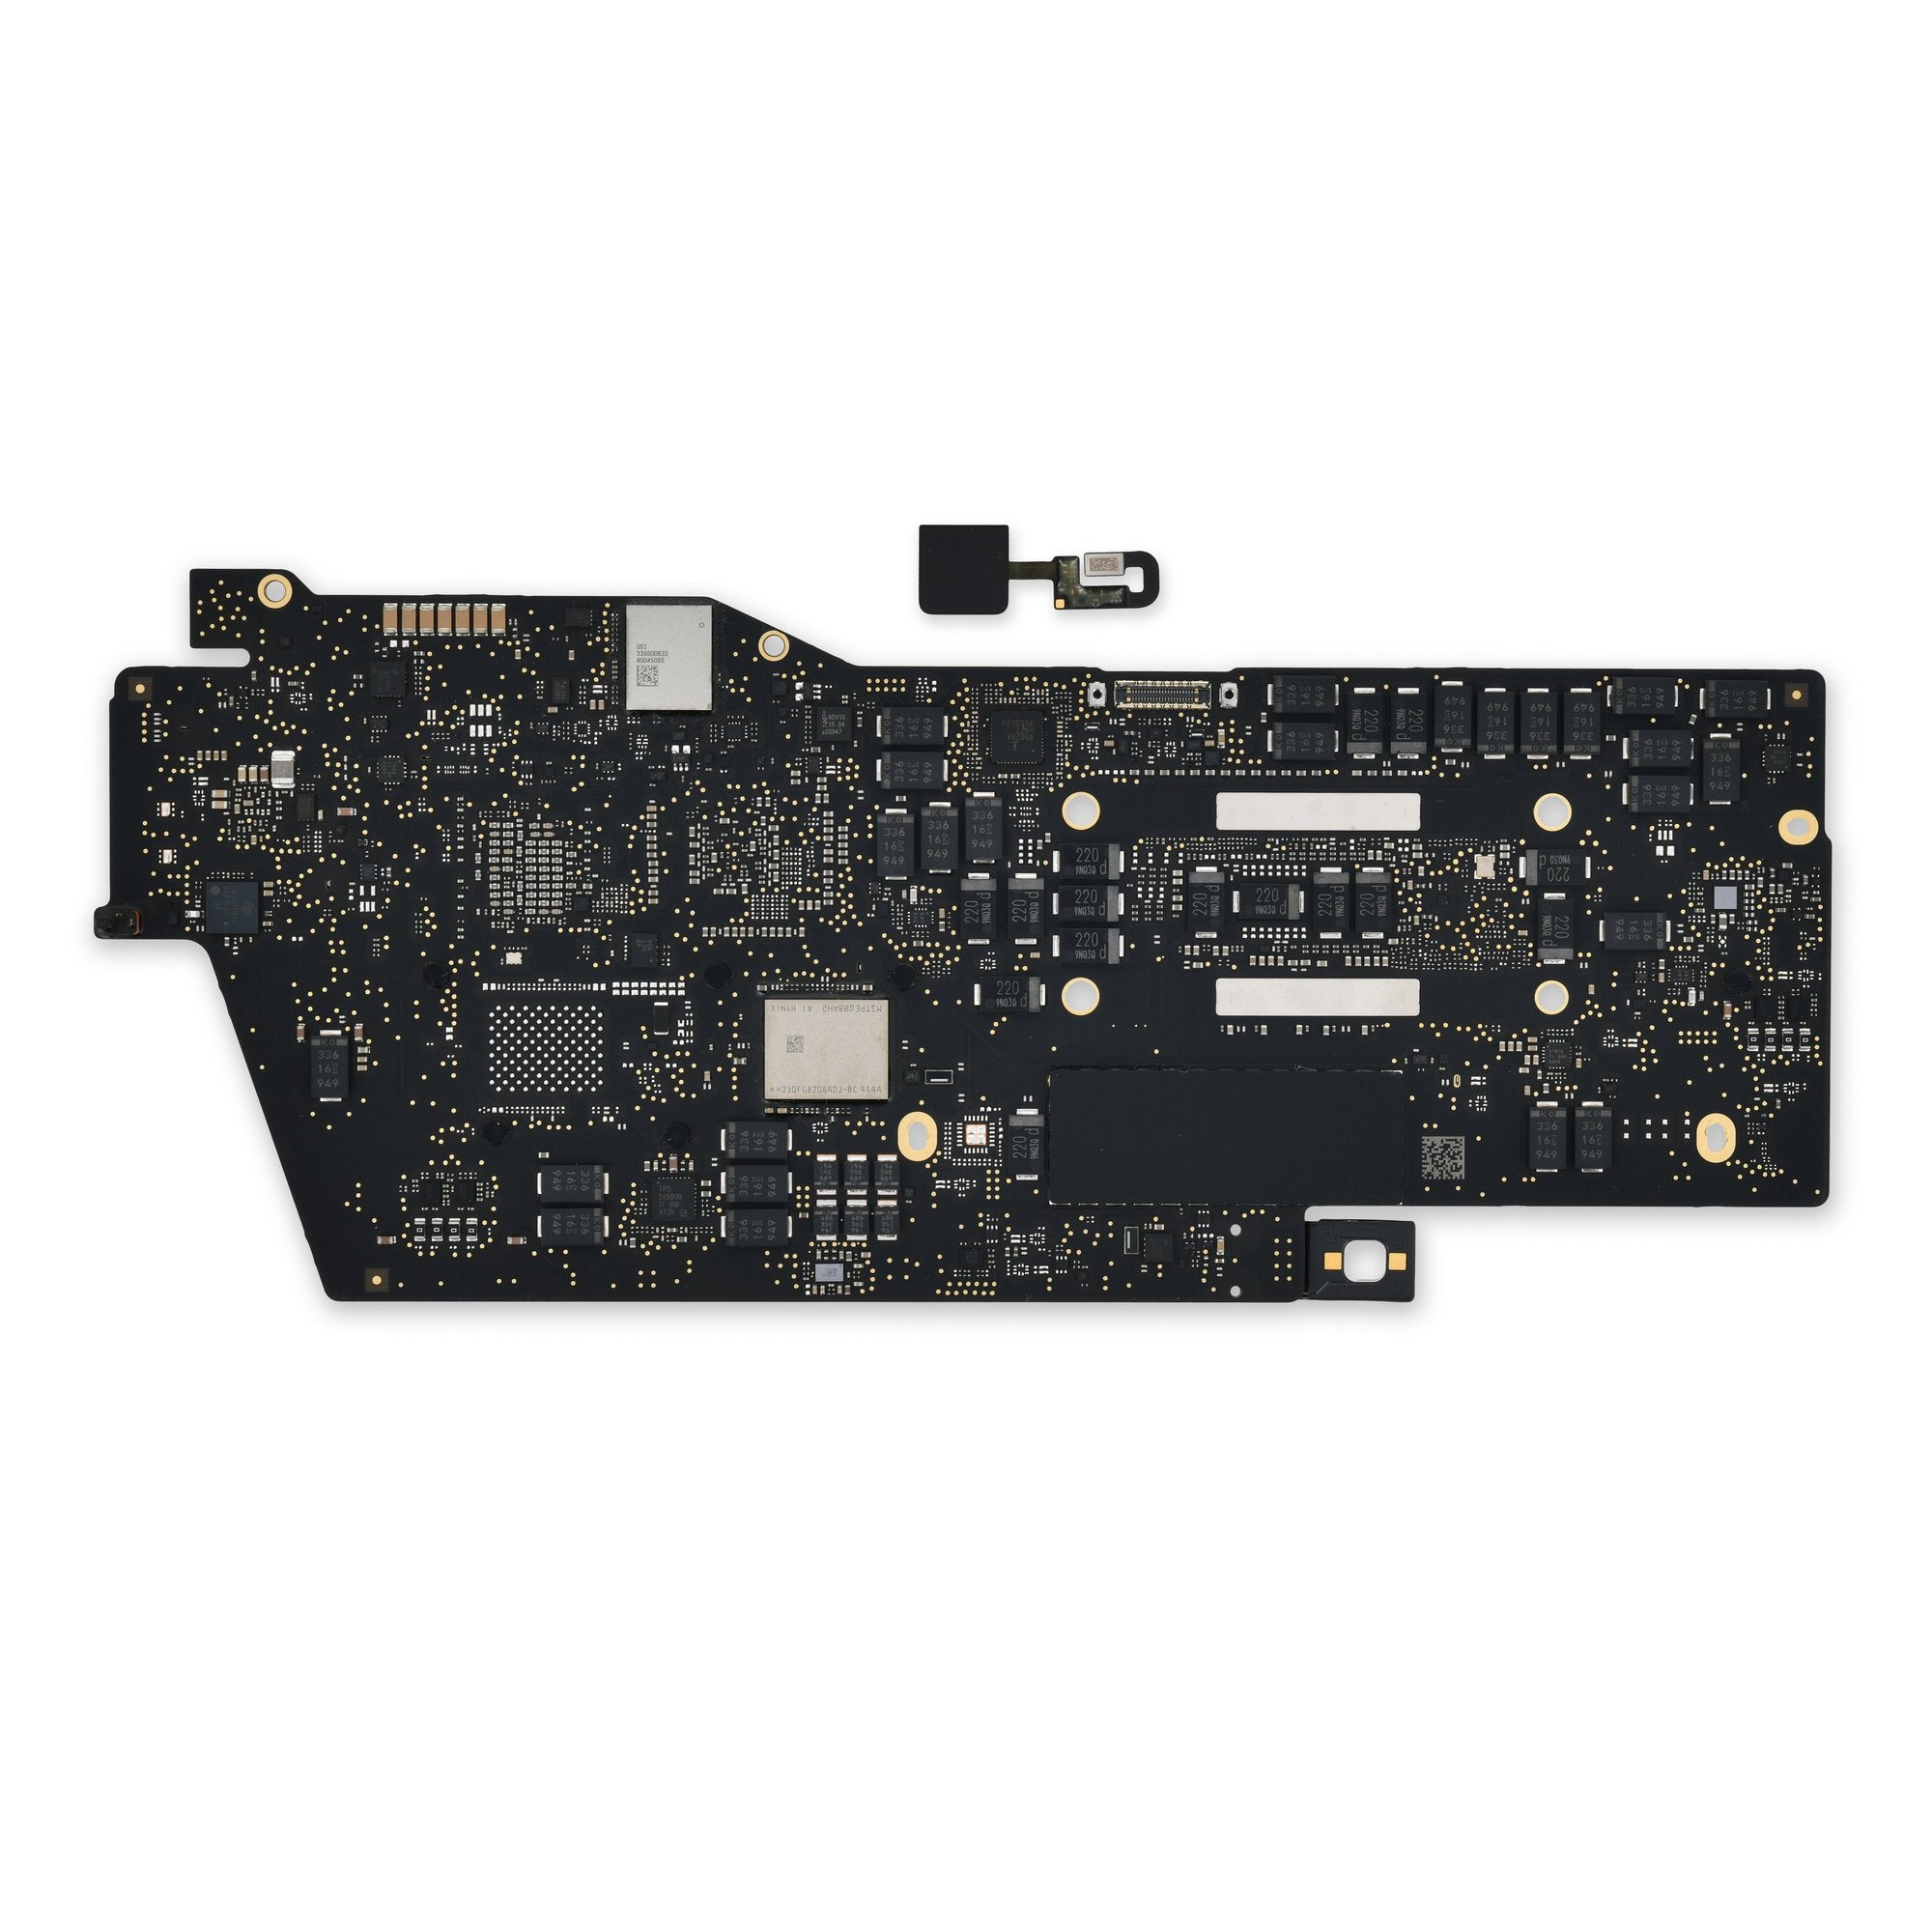 MacBook Pro 13" (A2159, 2019) 1.7 GHz Logic Board with Paired Touch ID Sensor 8 GB RAM 128 GB Used